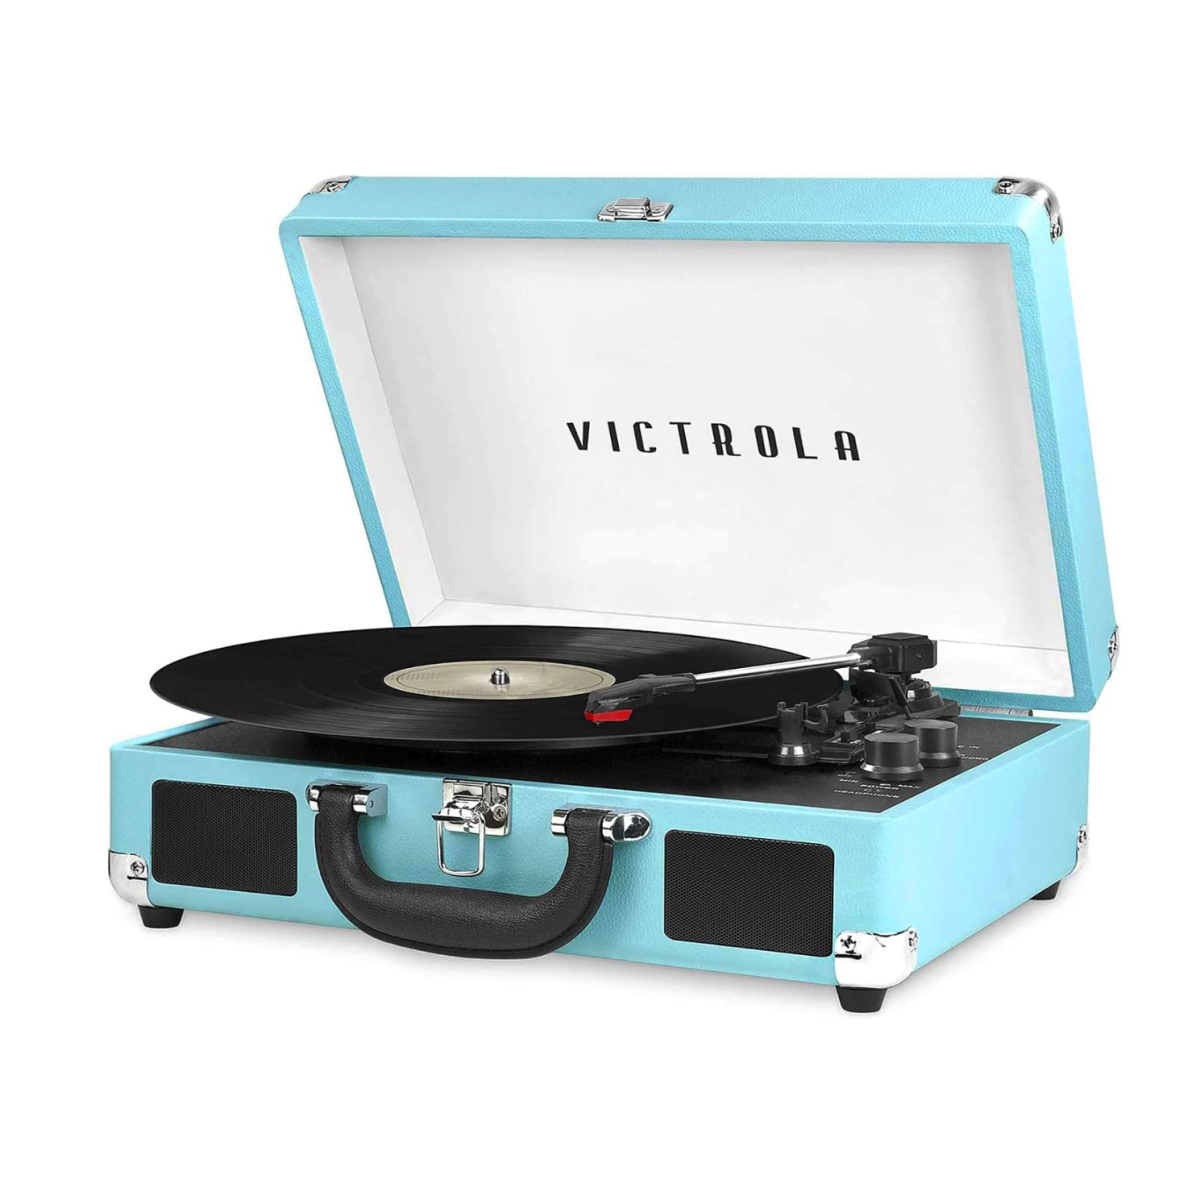 A turquoise Victrola Vintage Suitcase Turntable